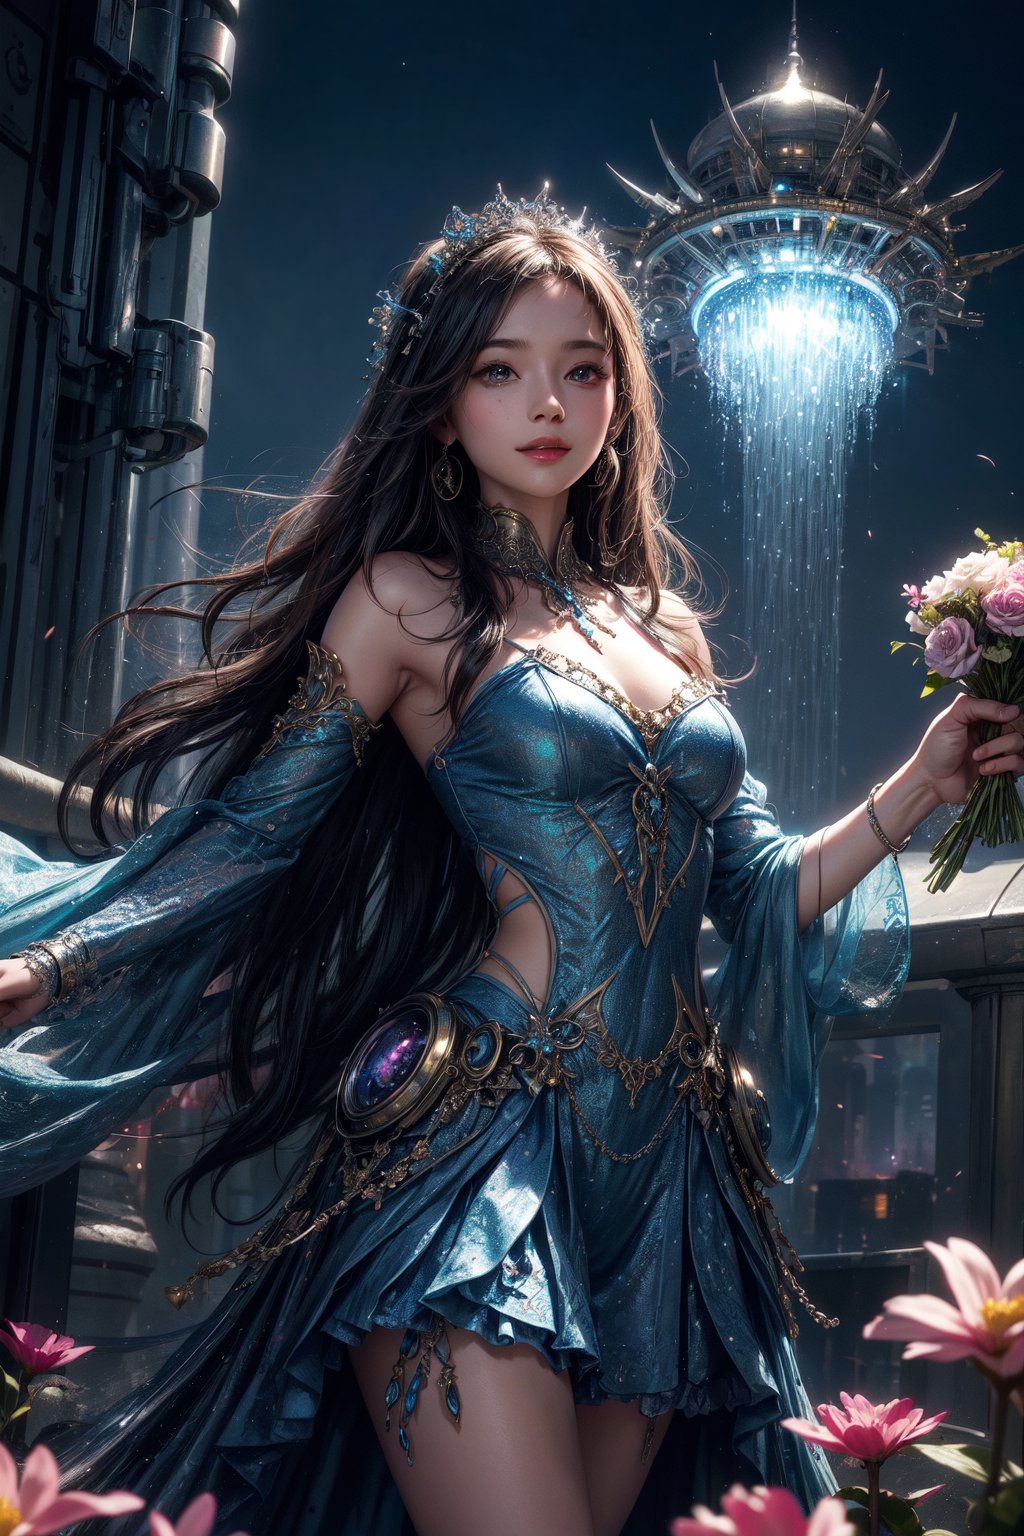 A vibrant young girl, radiating charm, holds a bouquet of vivid flowers while standing in an enchanting landscape reminiscent of Wonderland. In the backdrop, a futuristic alien city towers into the sky, bathed in a mystical blue glow. With a radiant smile and open arms, the girl seems to invite the extraterrestrial guests, presenting her own corner of magic in this fantastical sci-fi realm.